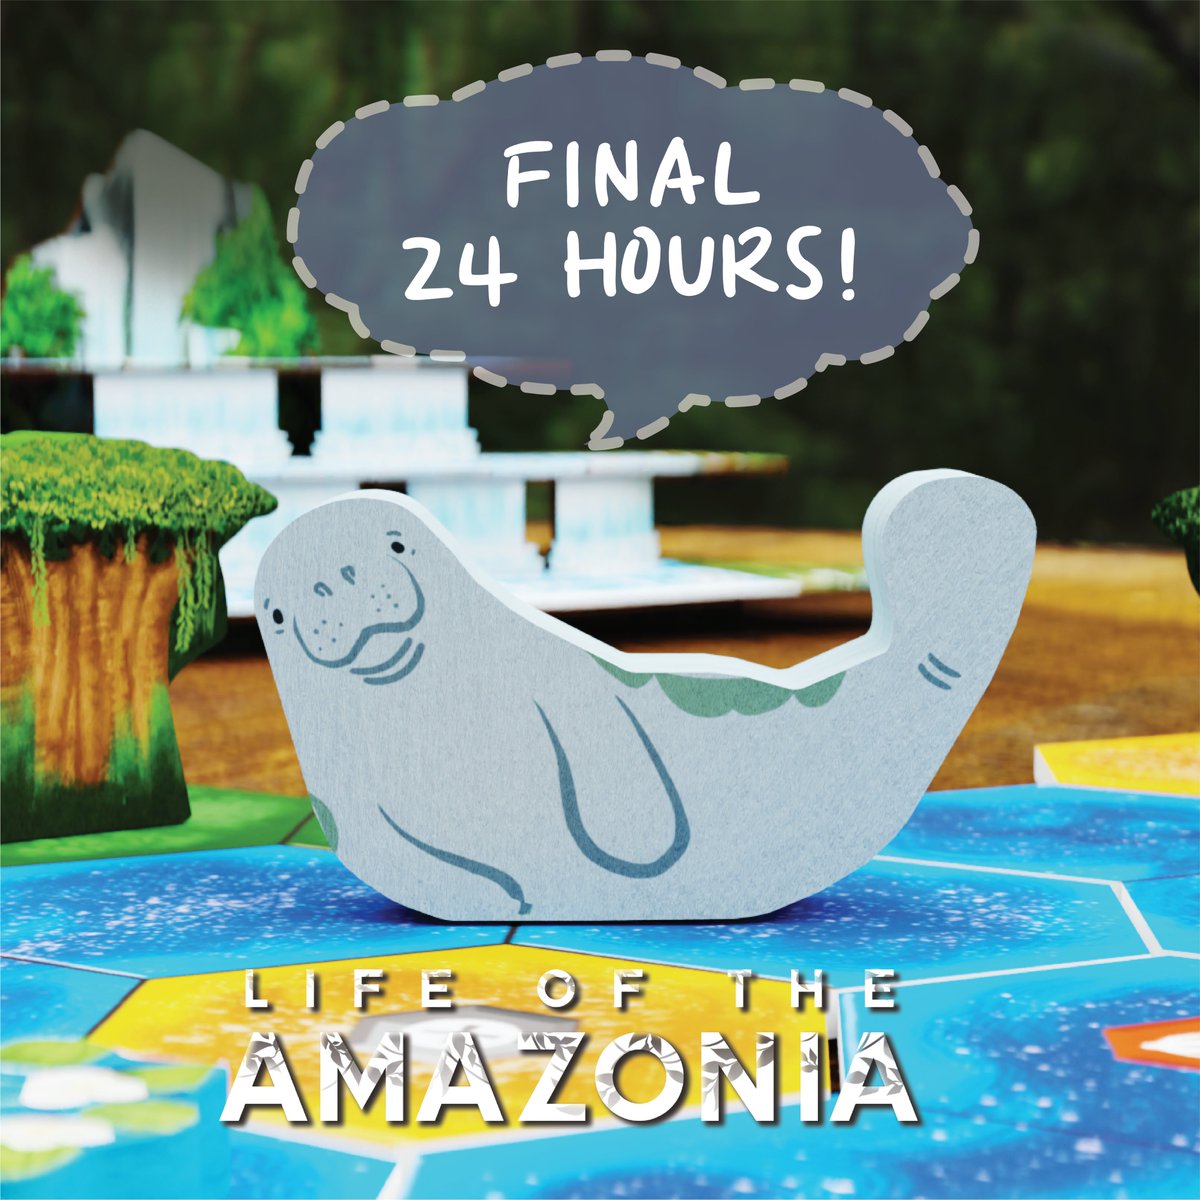 We are closing into the FINAL 24 HOURS of our Kickstarter Campaign for [Life of the Amazonia]. With 16 amazing Stretch Goals already unlocked, we now reaching for our 18th to bring our Black Jaguar home. Make sure to check it out through the link below! kickstarter.com/projects/badco…